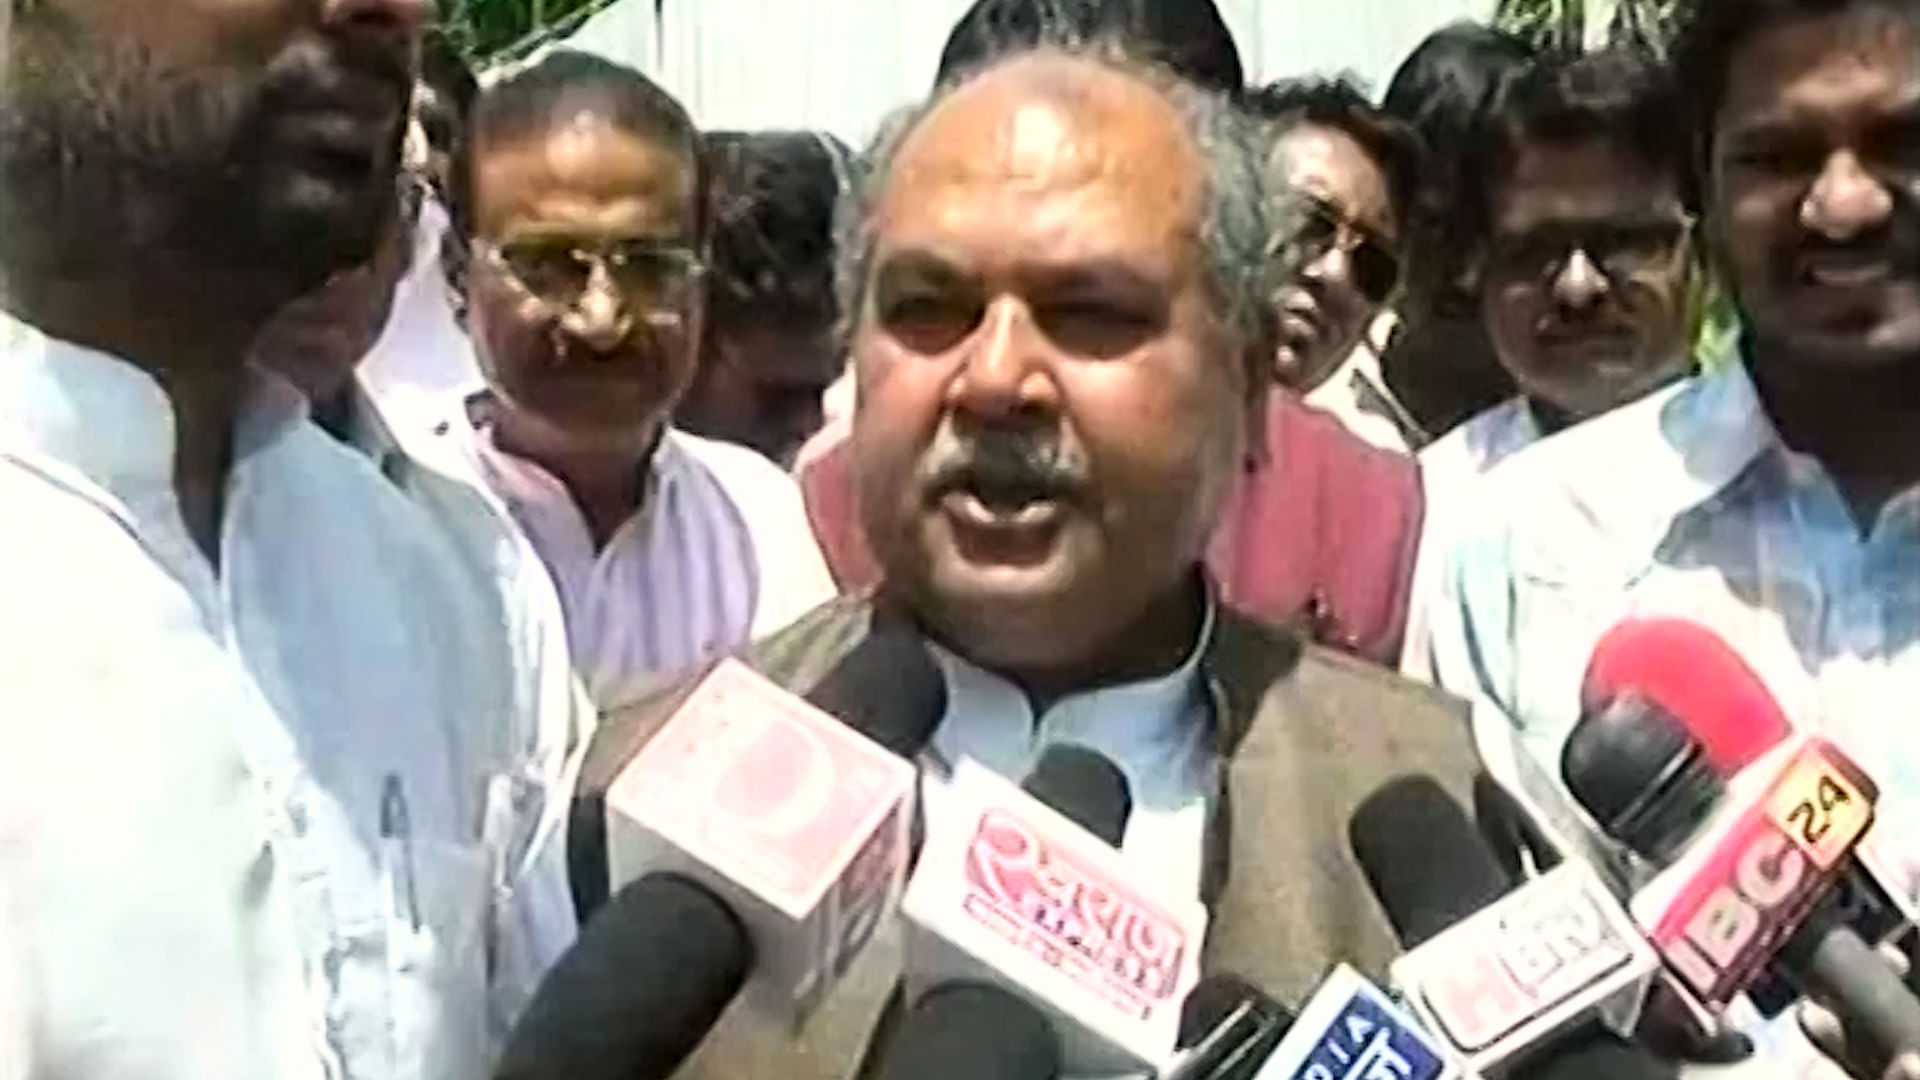 Union Minister for Steel and Mines Narendra Singh Tomar comments on ‘Achhe Din’. (Photo: ANI screengrab)